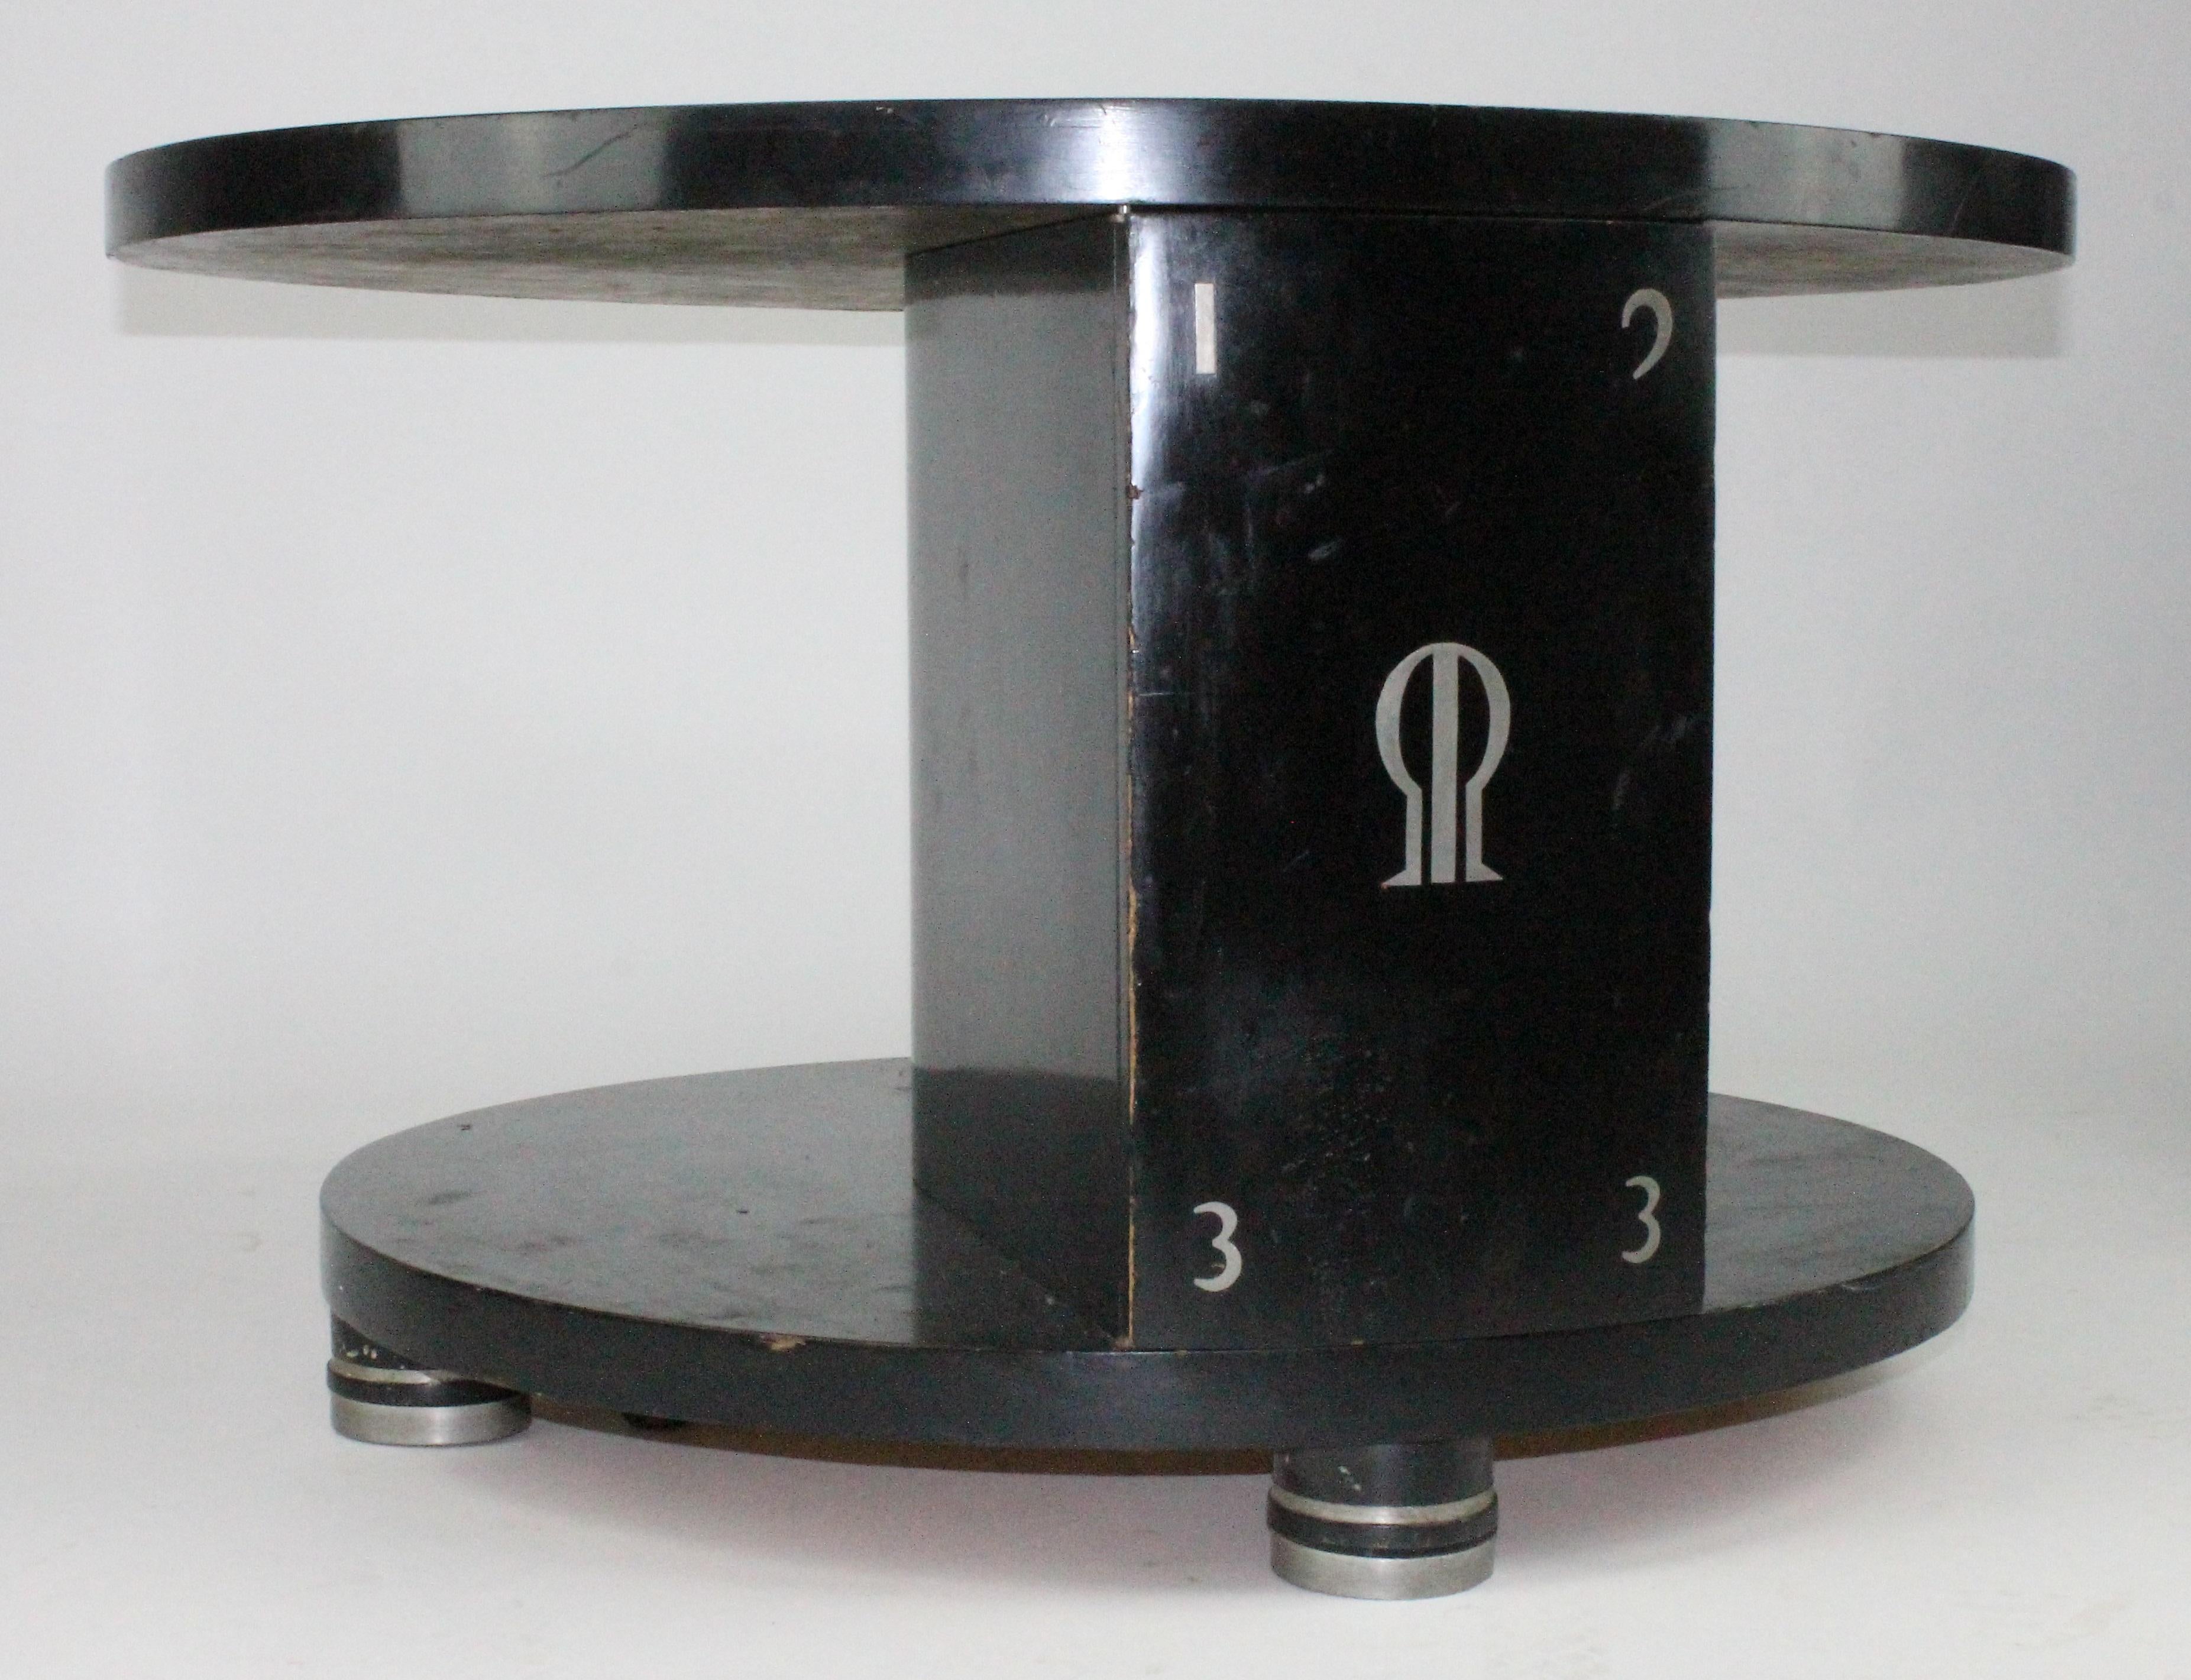 Art Deco Alvar Andersson Table, 1933, Swedish, Black Painted with Pewter Inlays